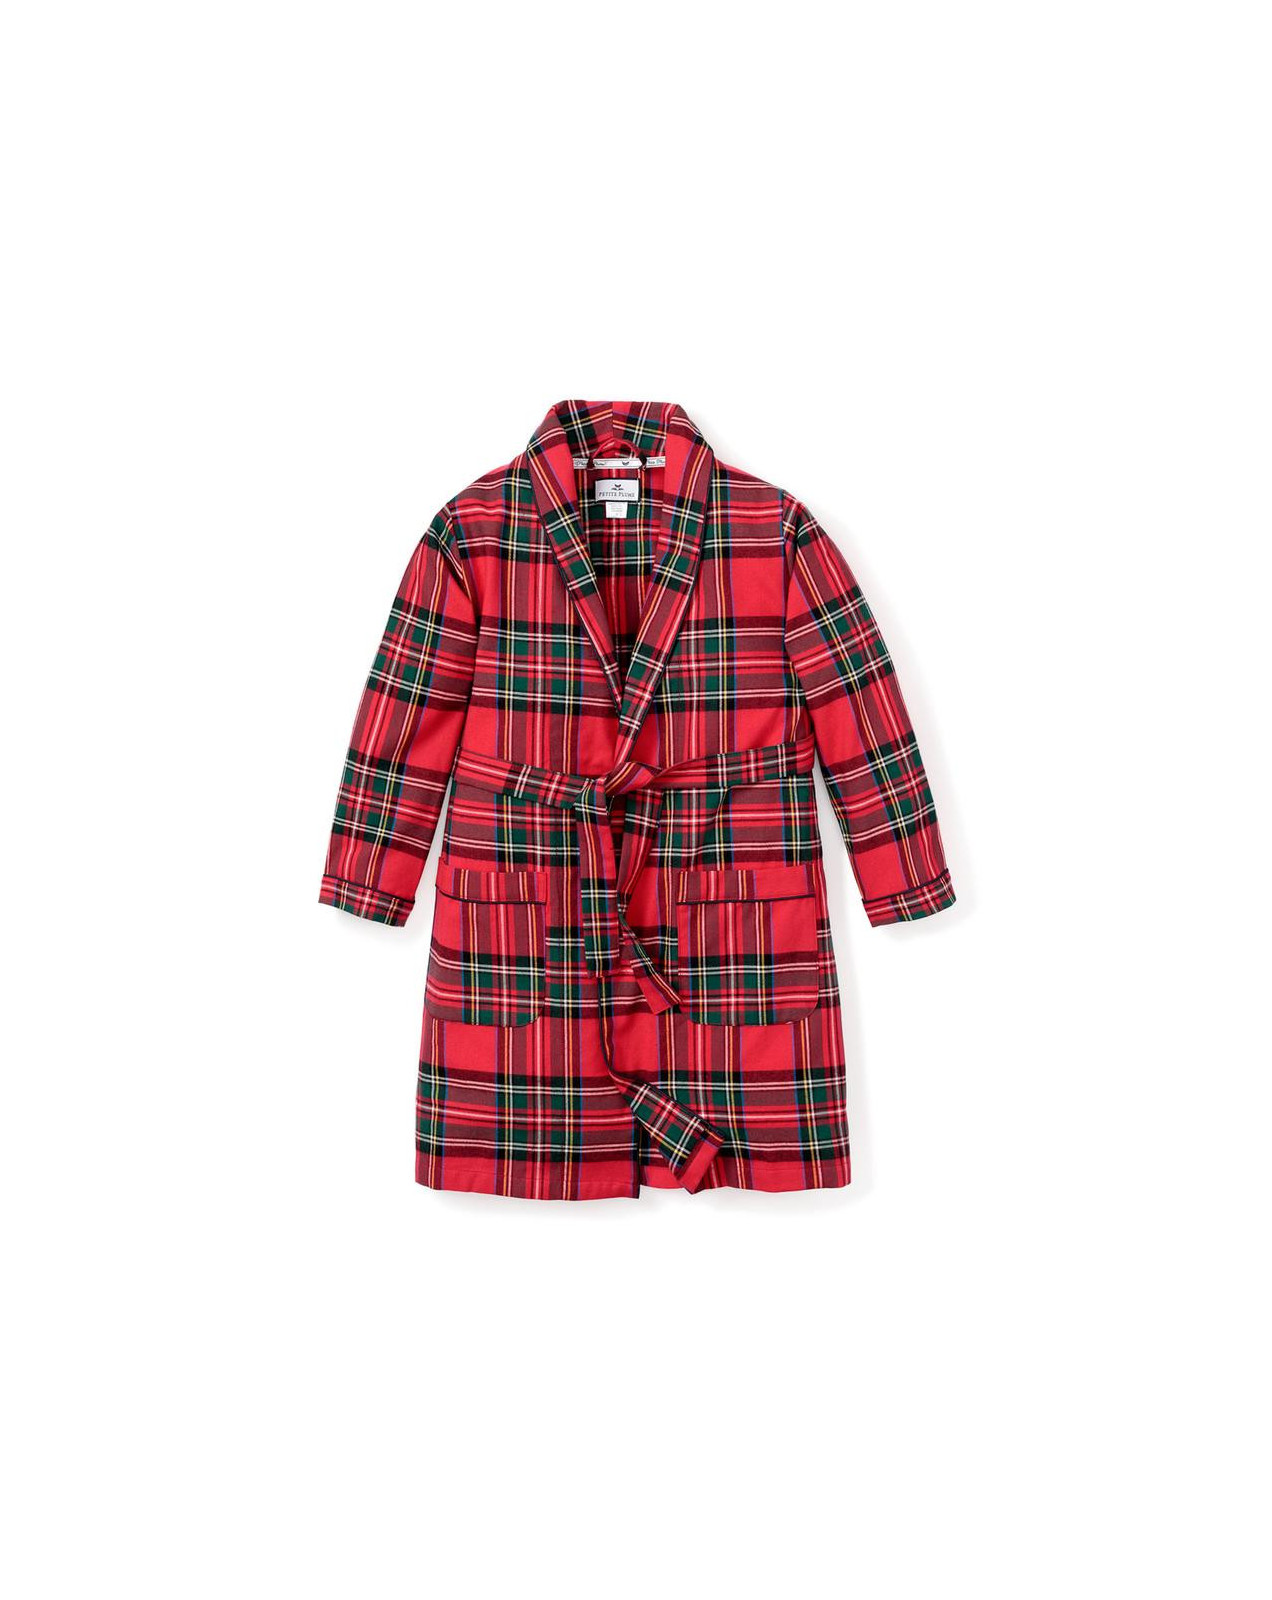 Cotton flannel chil dressing gown red plaid Royal Stewart